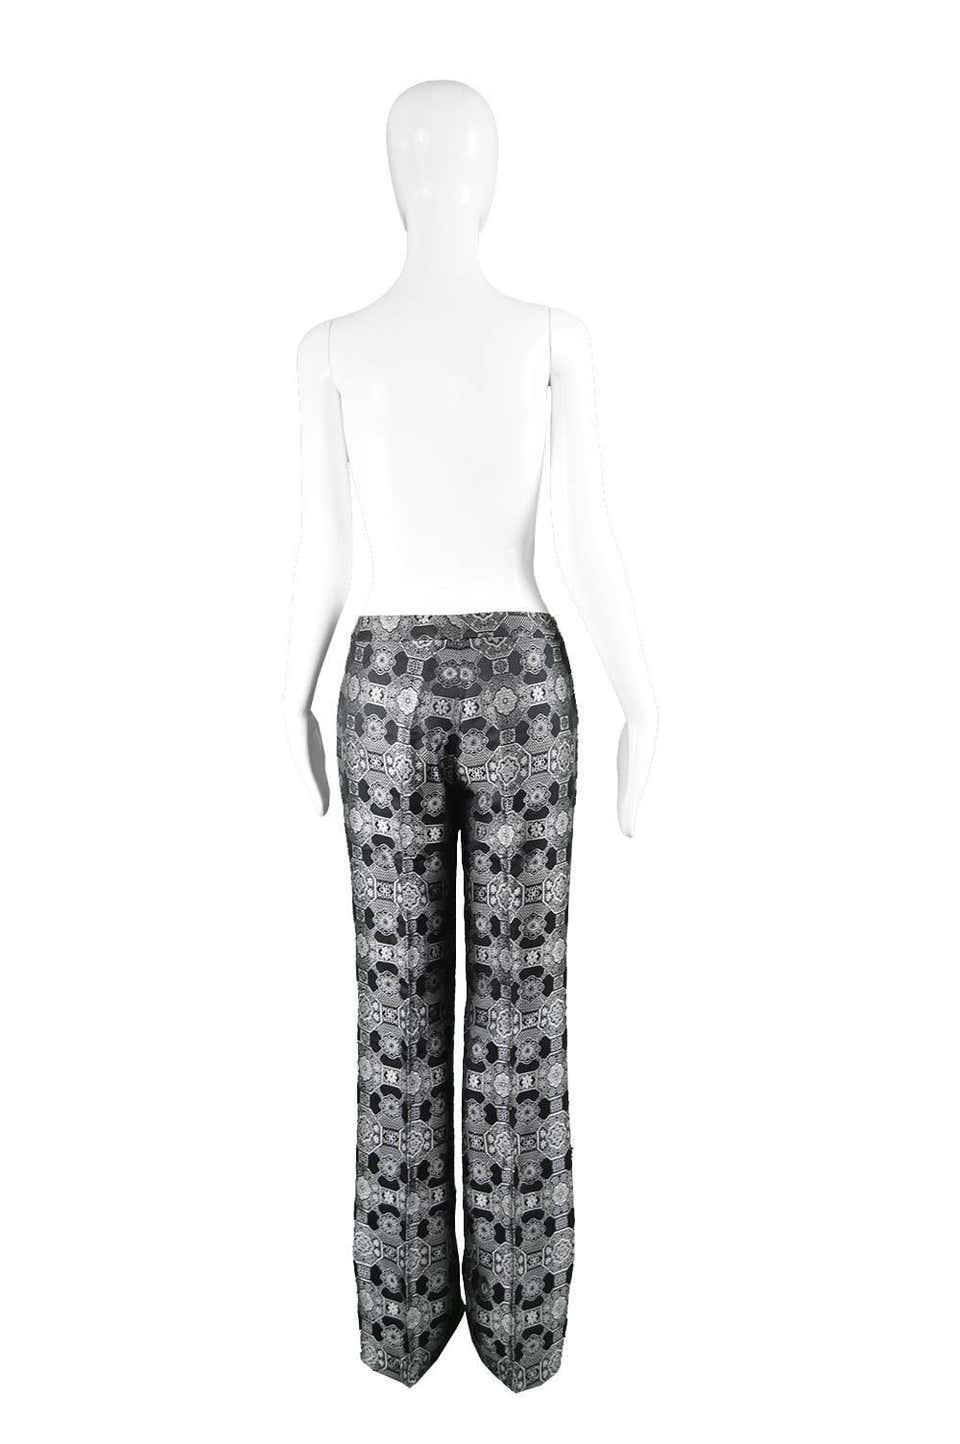 Vintage Womens Black & Silver Brocade Trousers, A/W 2003